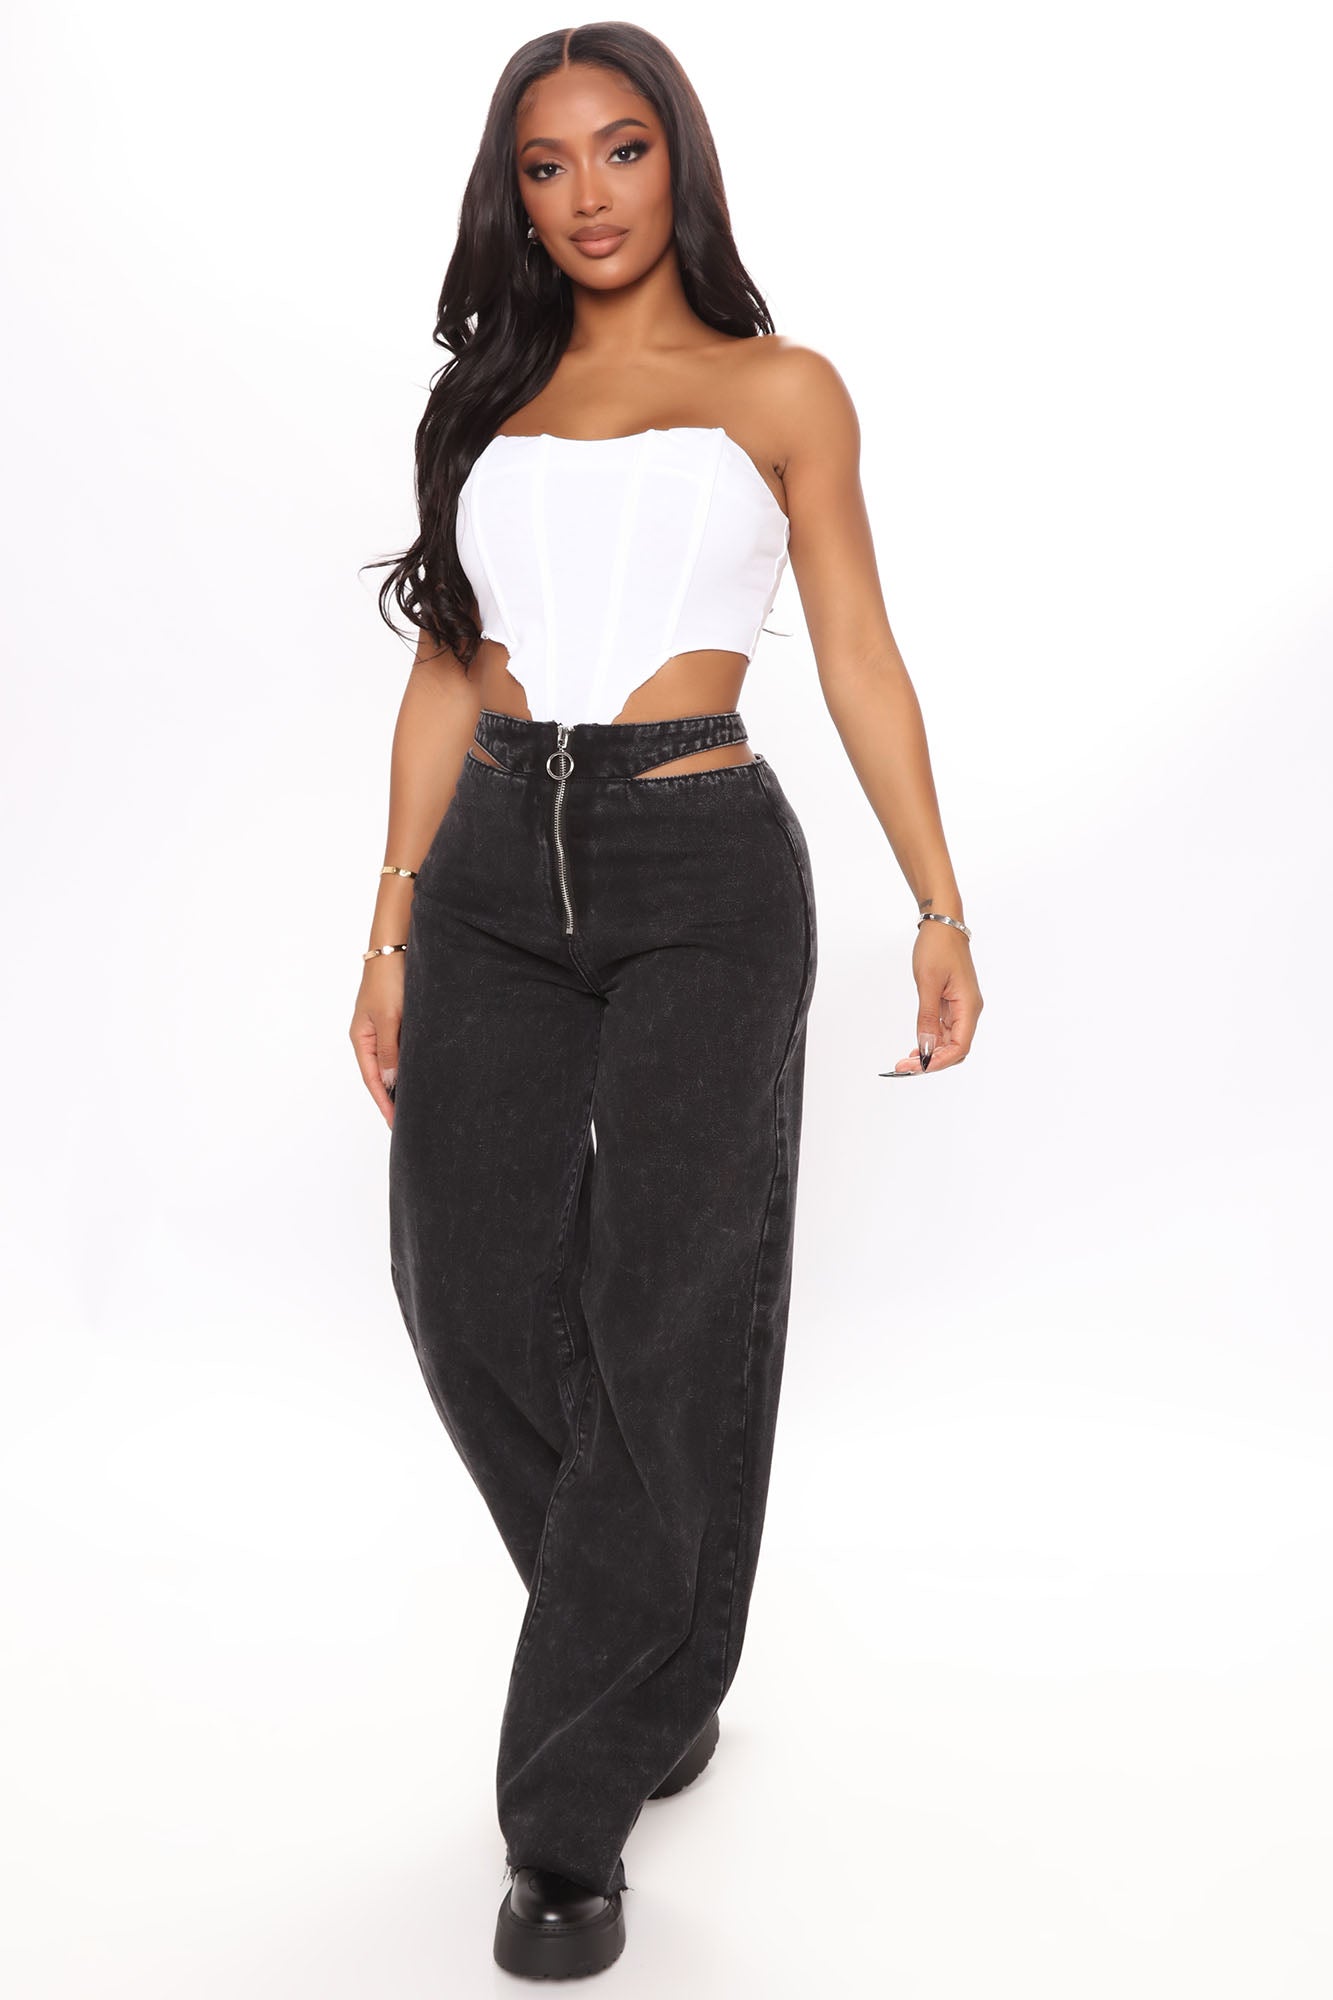 Caught Your Attention Cut Out Wide Leg Jeans - Black